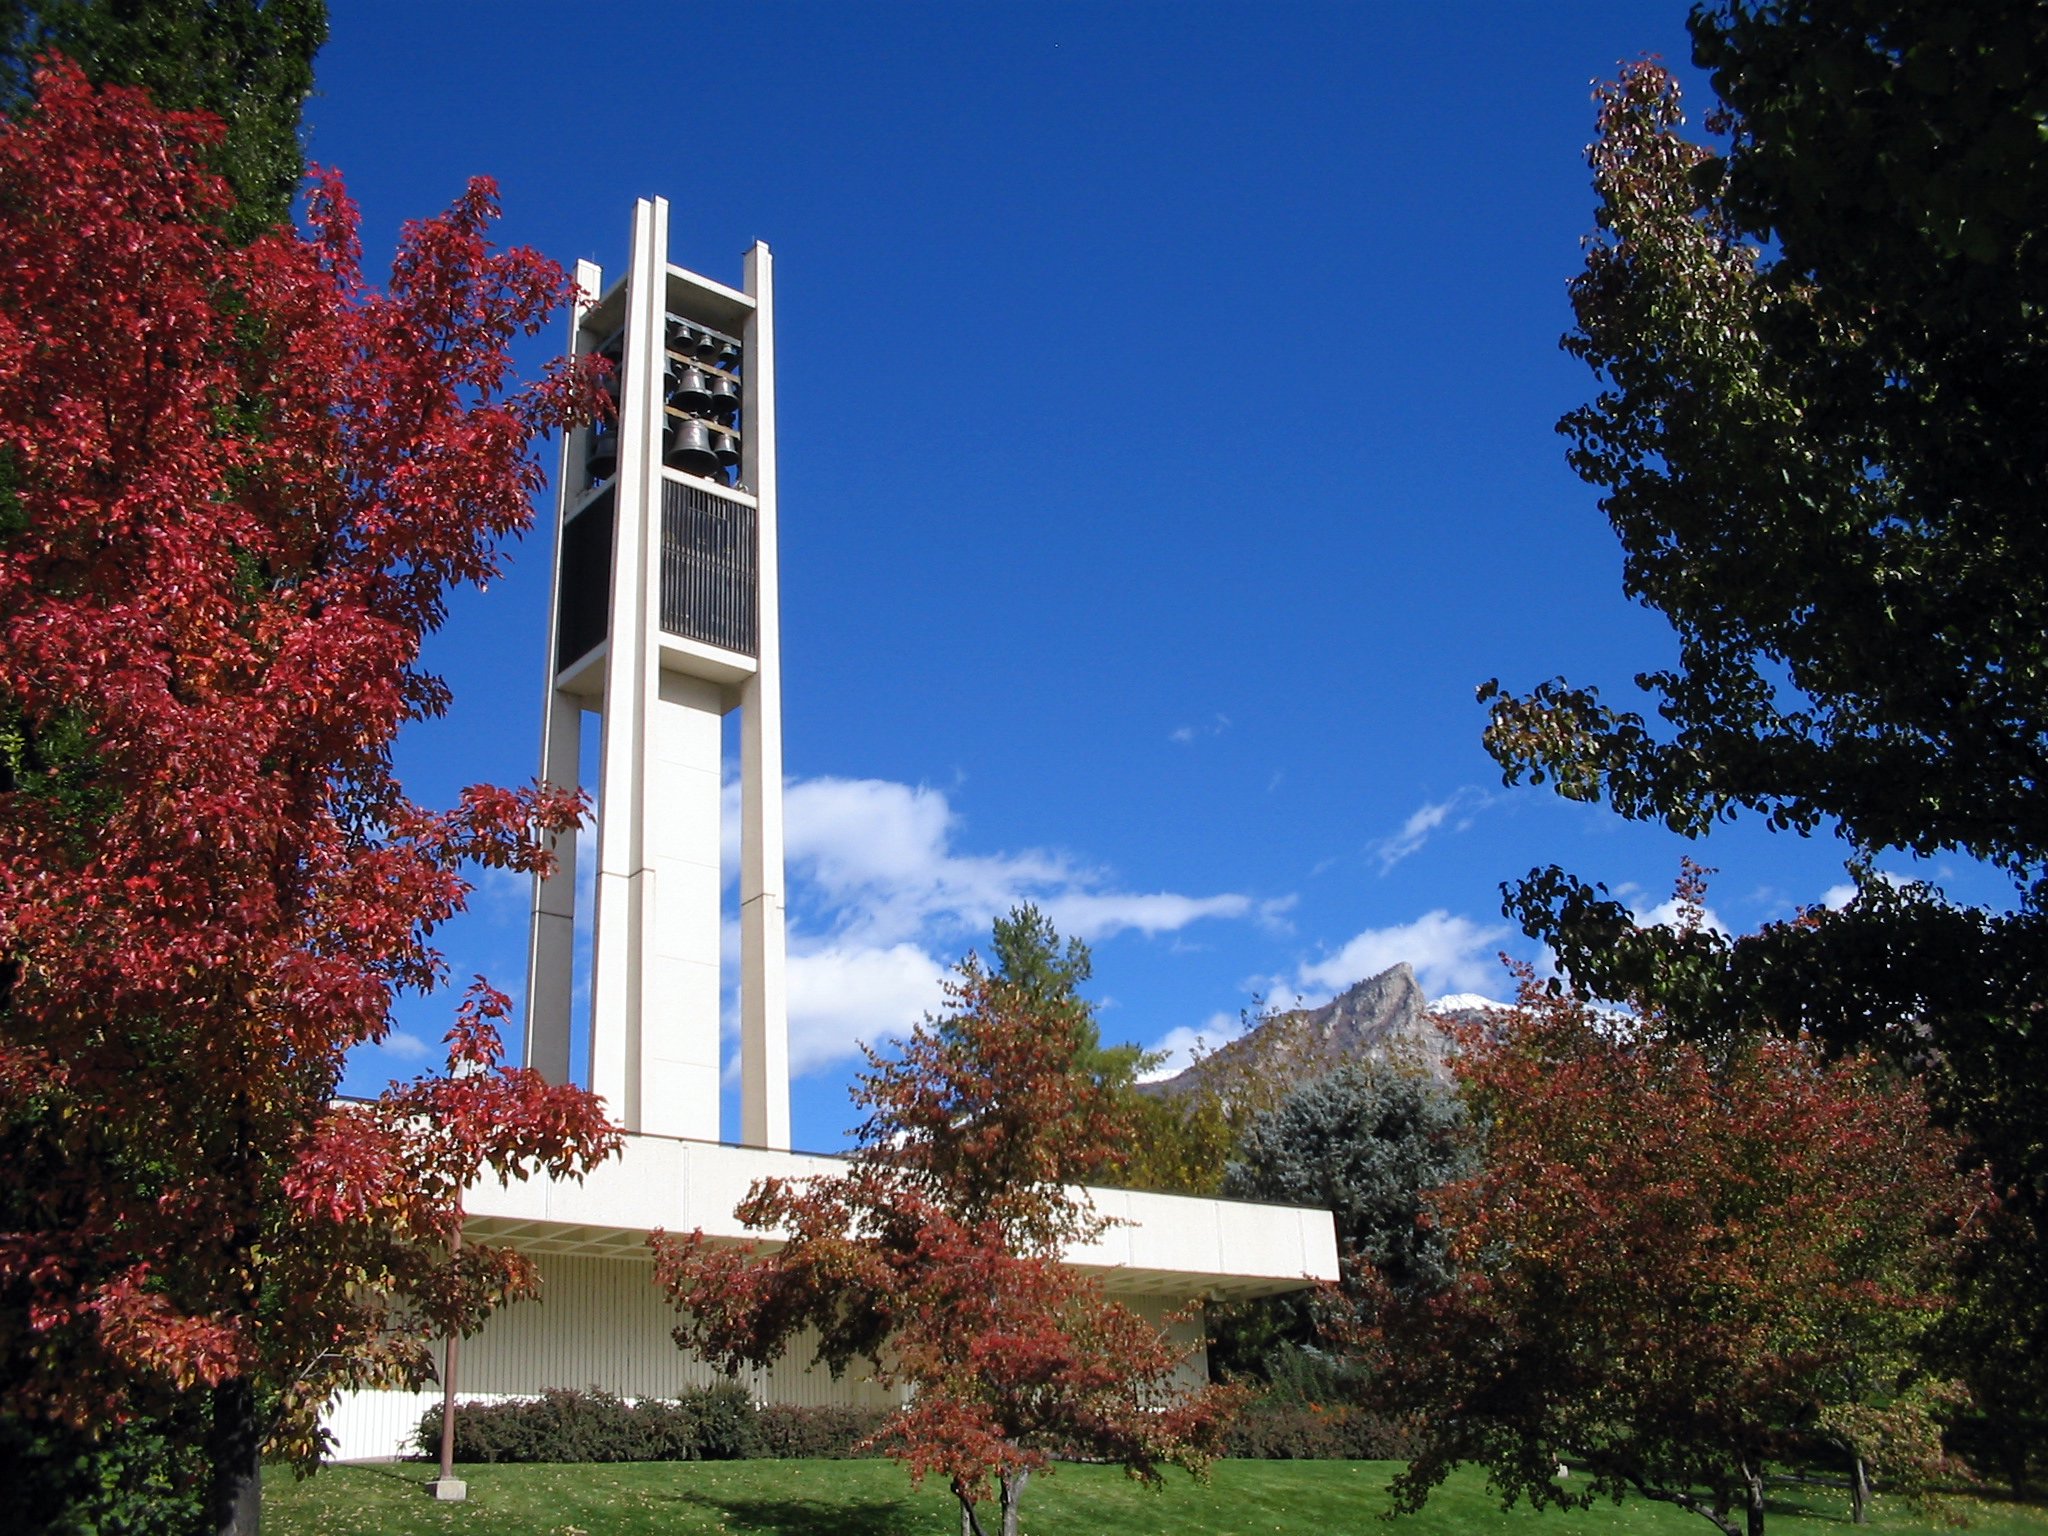 The Clarillon bell tower on BYU's campus